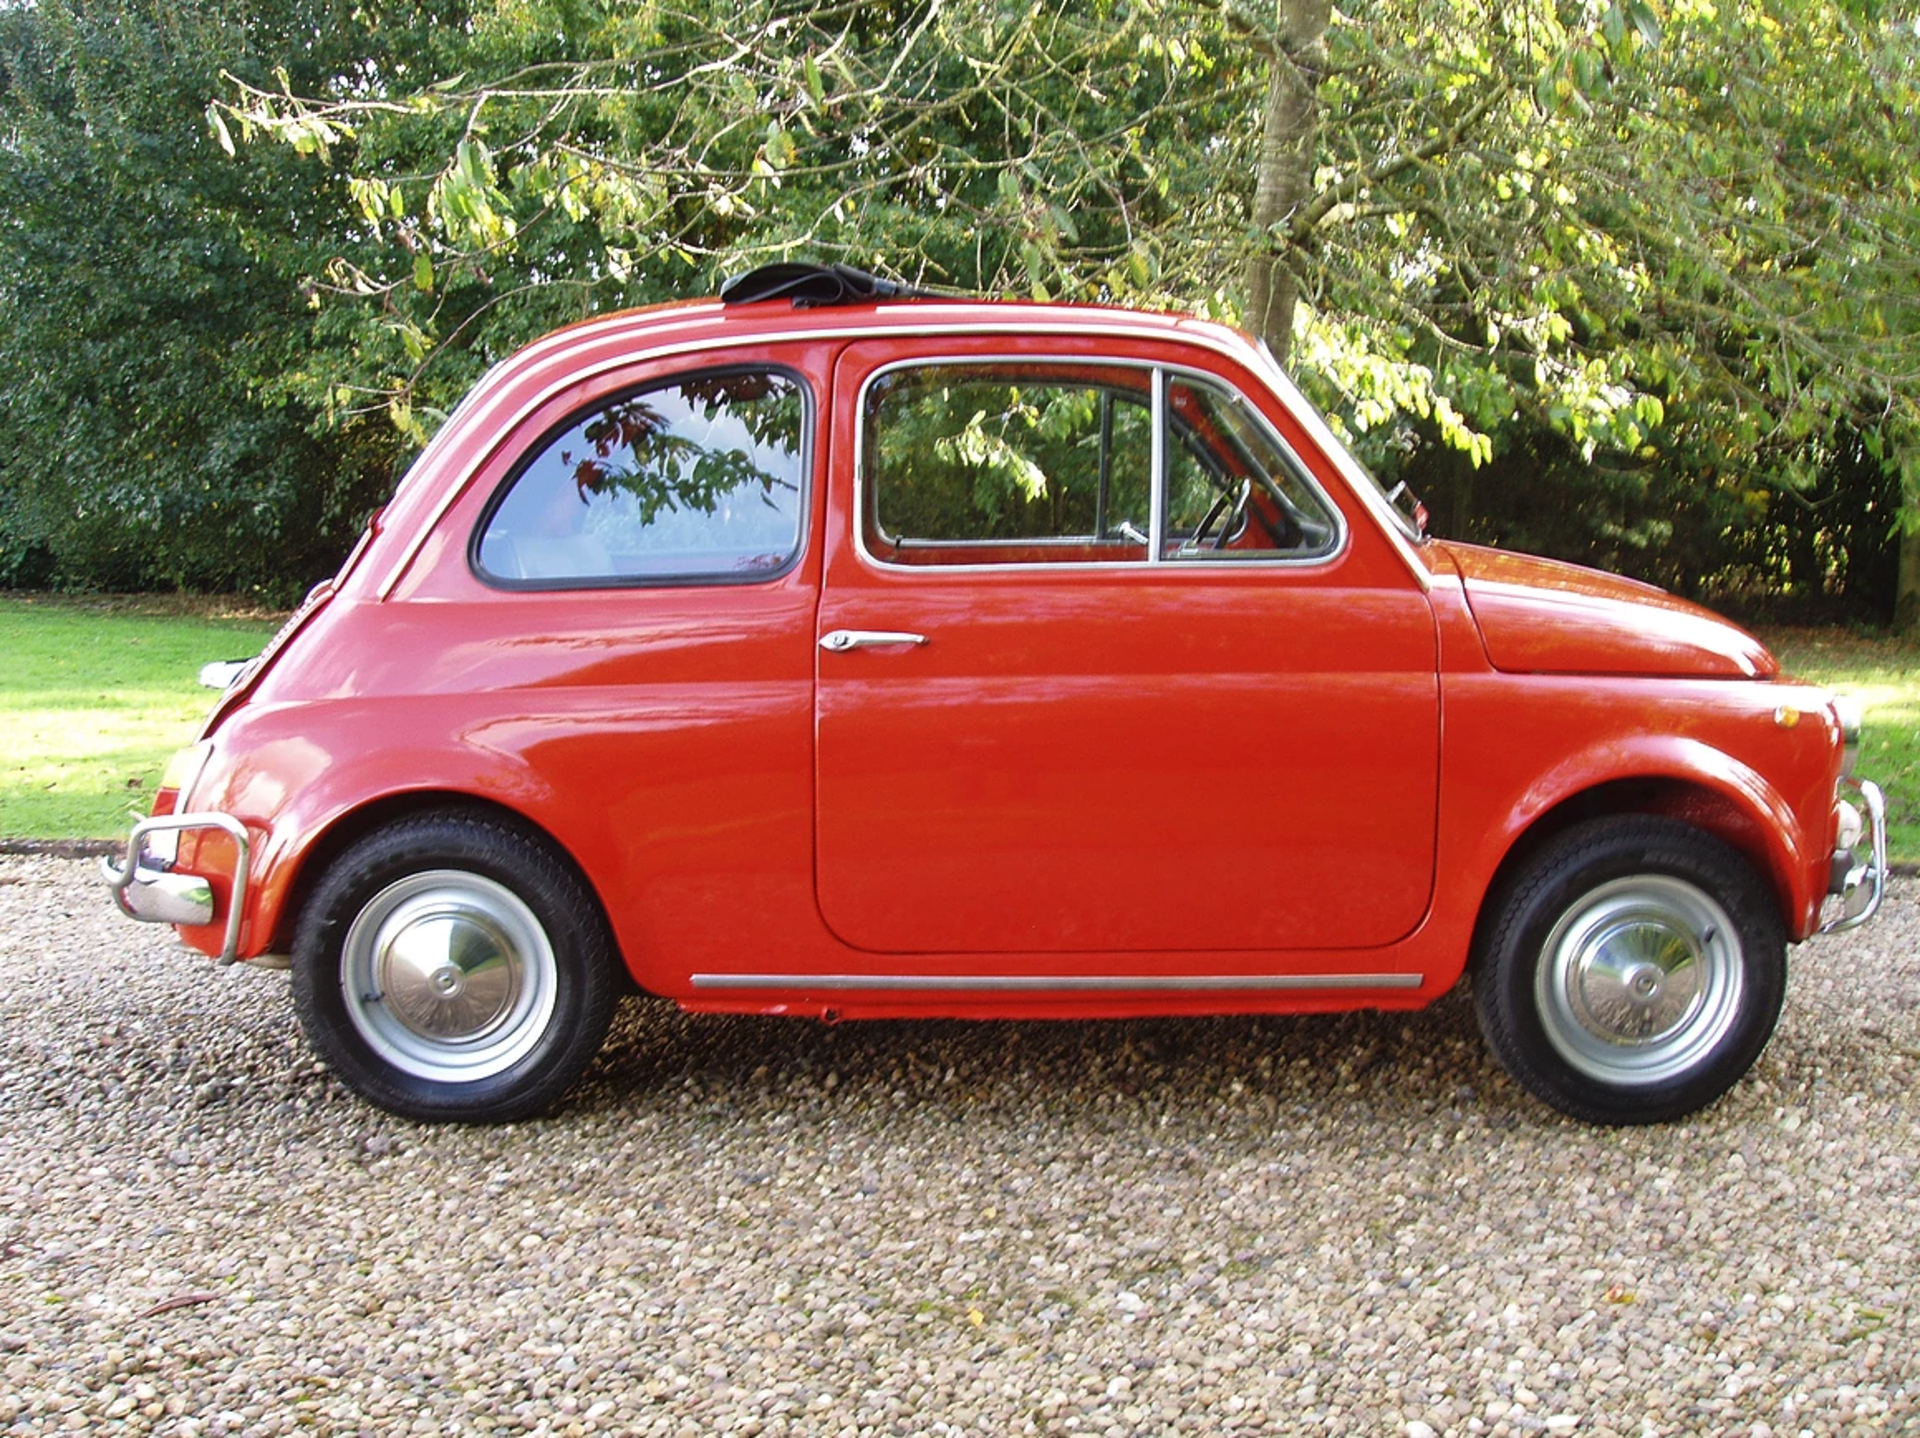 1970 Fiat 500 Lusso - Image 4 of 14